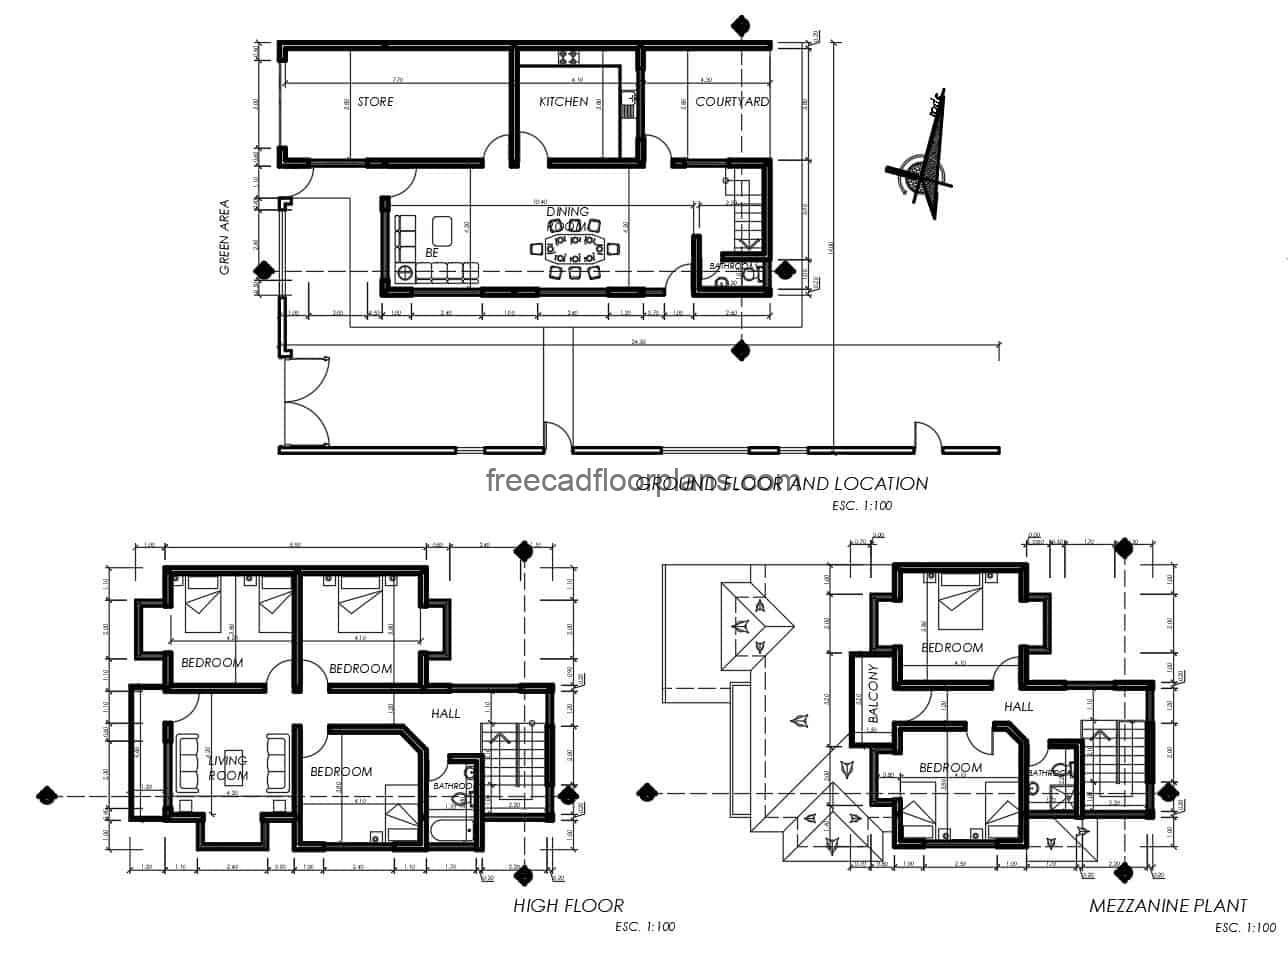 Modern house project with some classic details, two levels with mezzanine, blocks in DWG, distribution of interior spaces